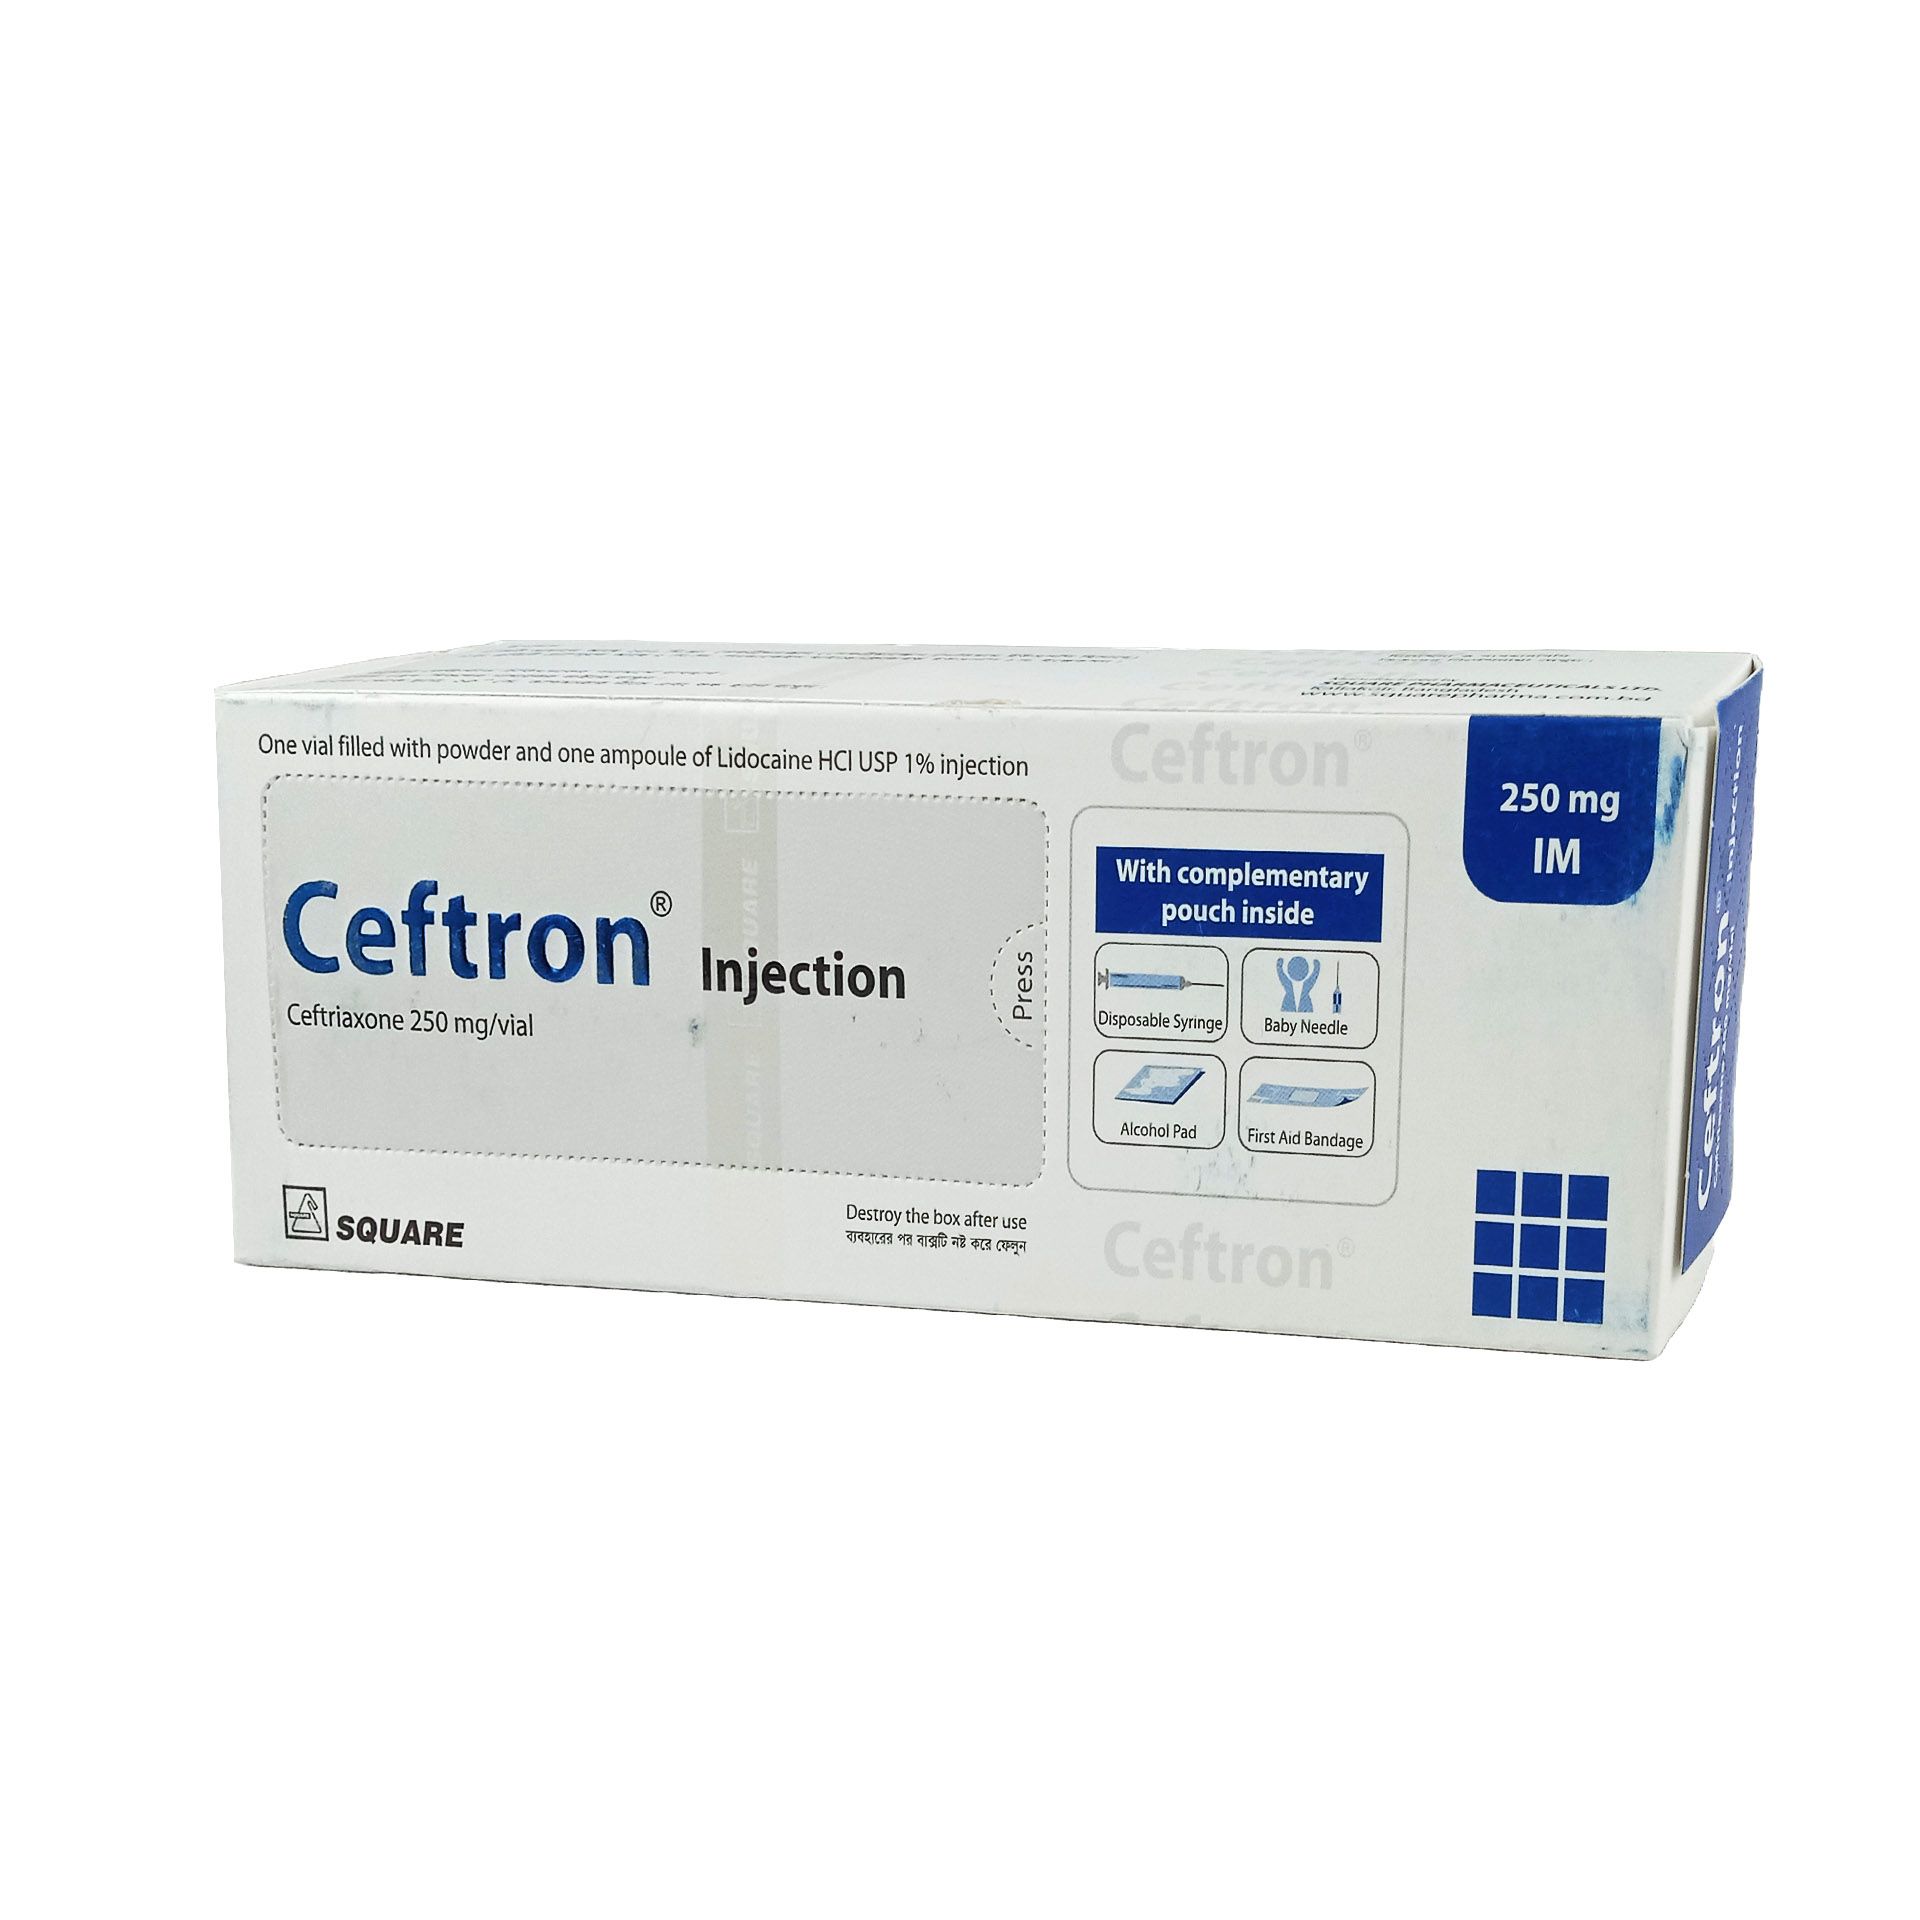 Ceftron 250 IM 250mg/vial Injection